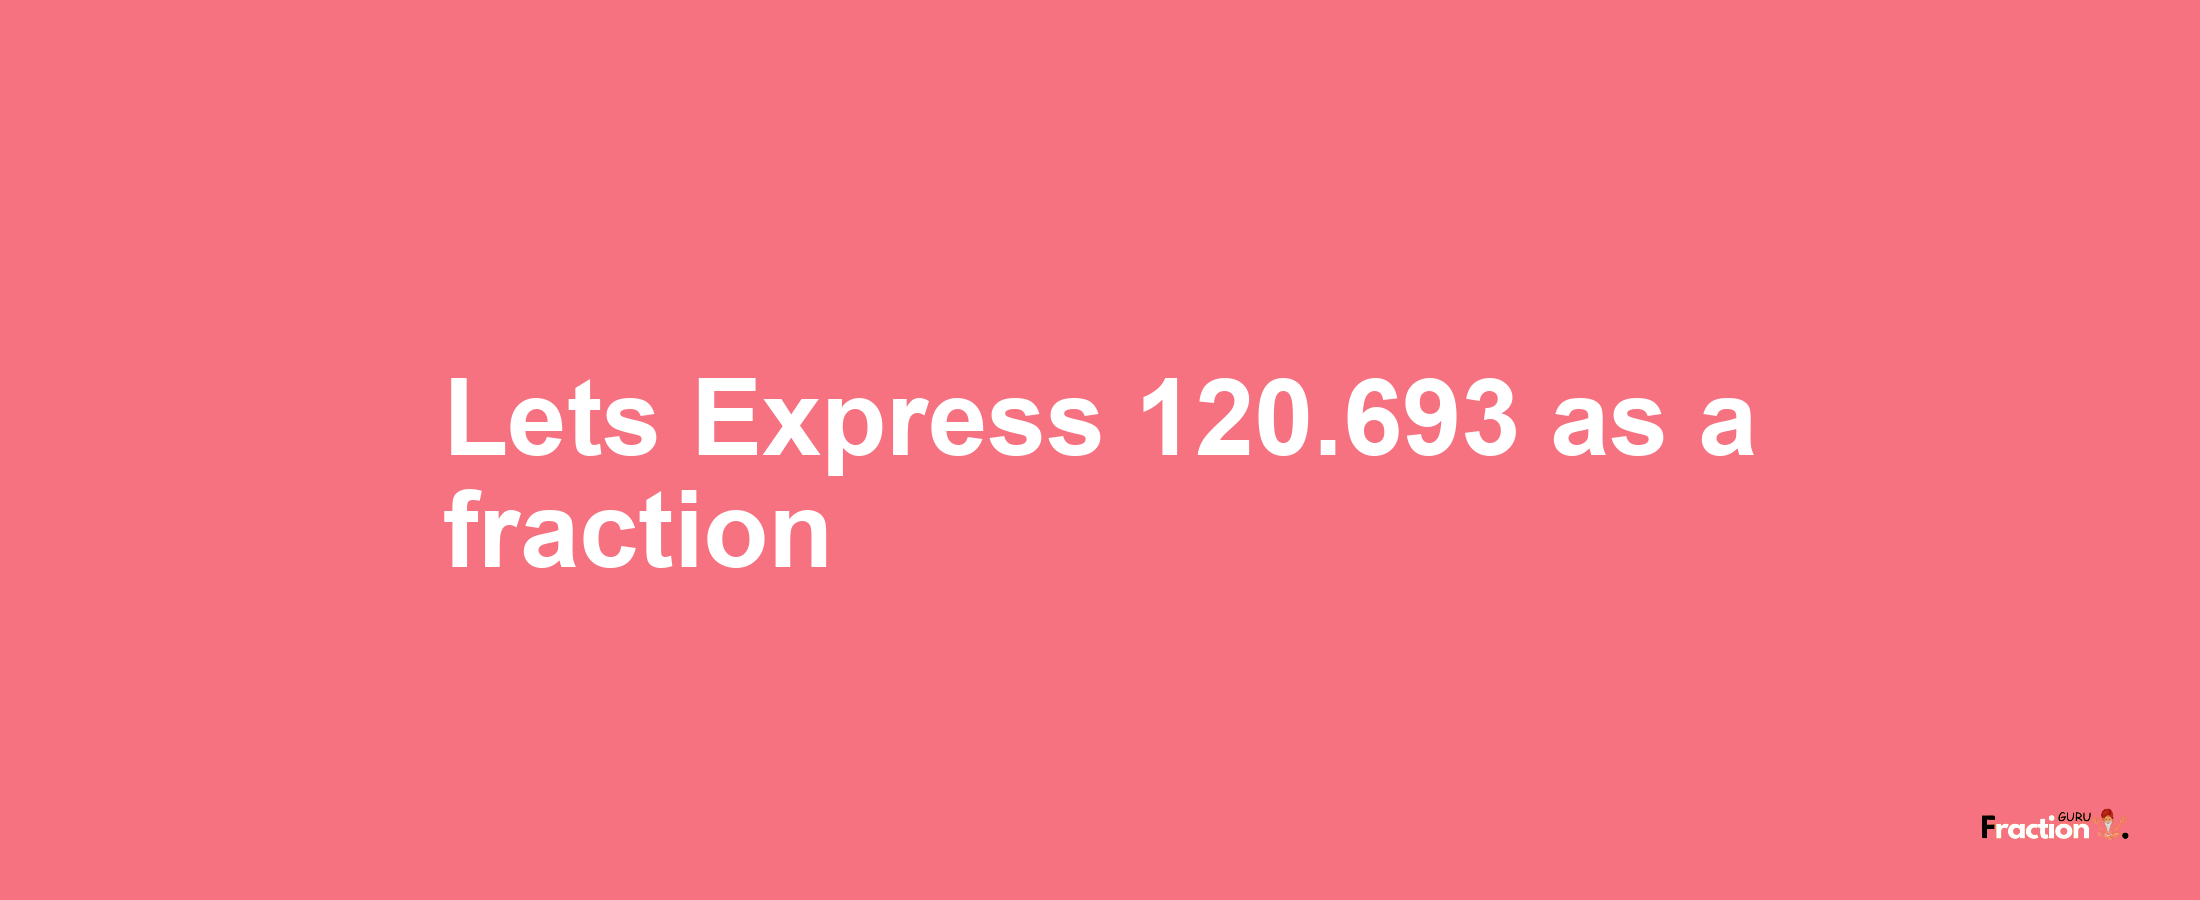 Lets Express 120.693 as afraction